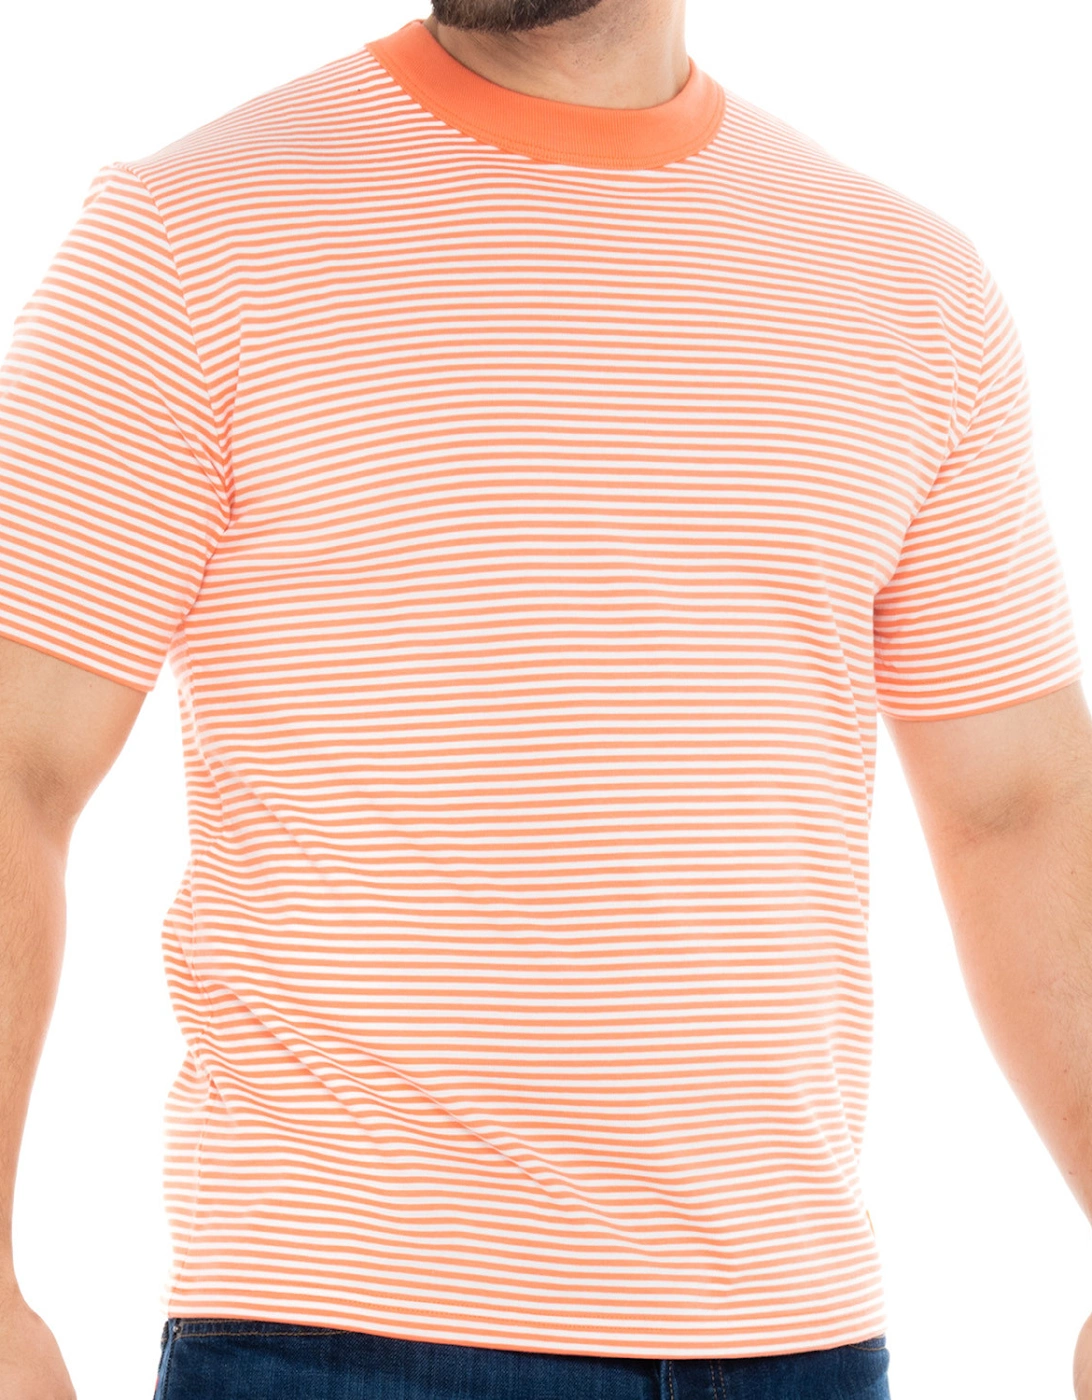 Armor Lux Mens Heritage Striped T-Shirt (Coral)